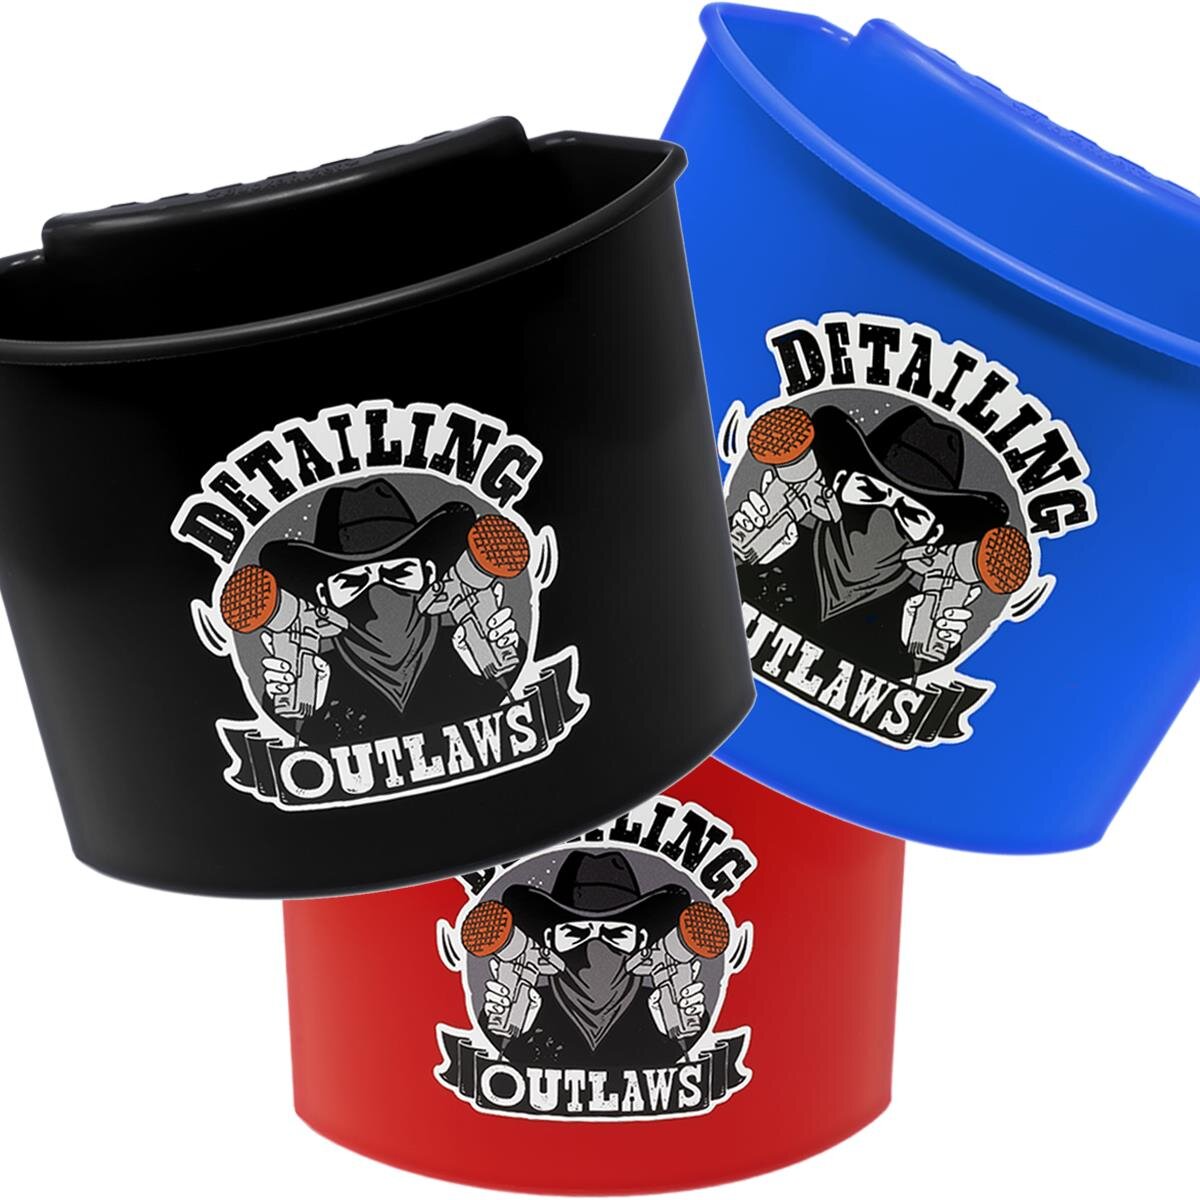 THE BUCKANIZER - A bucket organizer by Detailing Outlaws! 